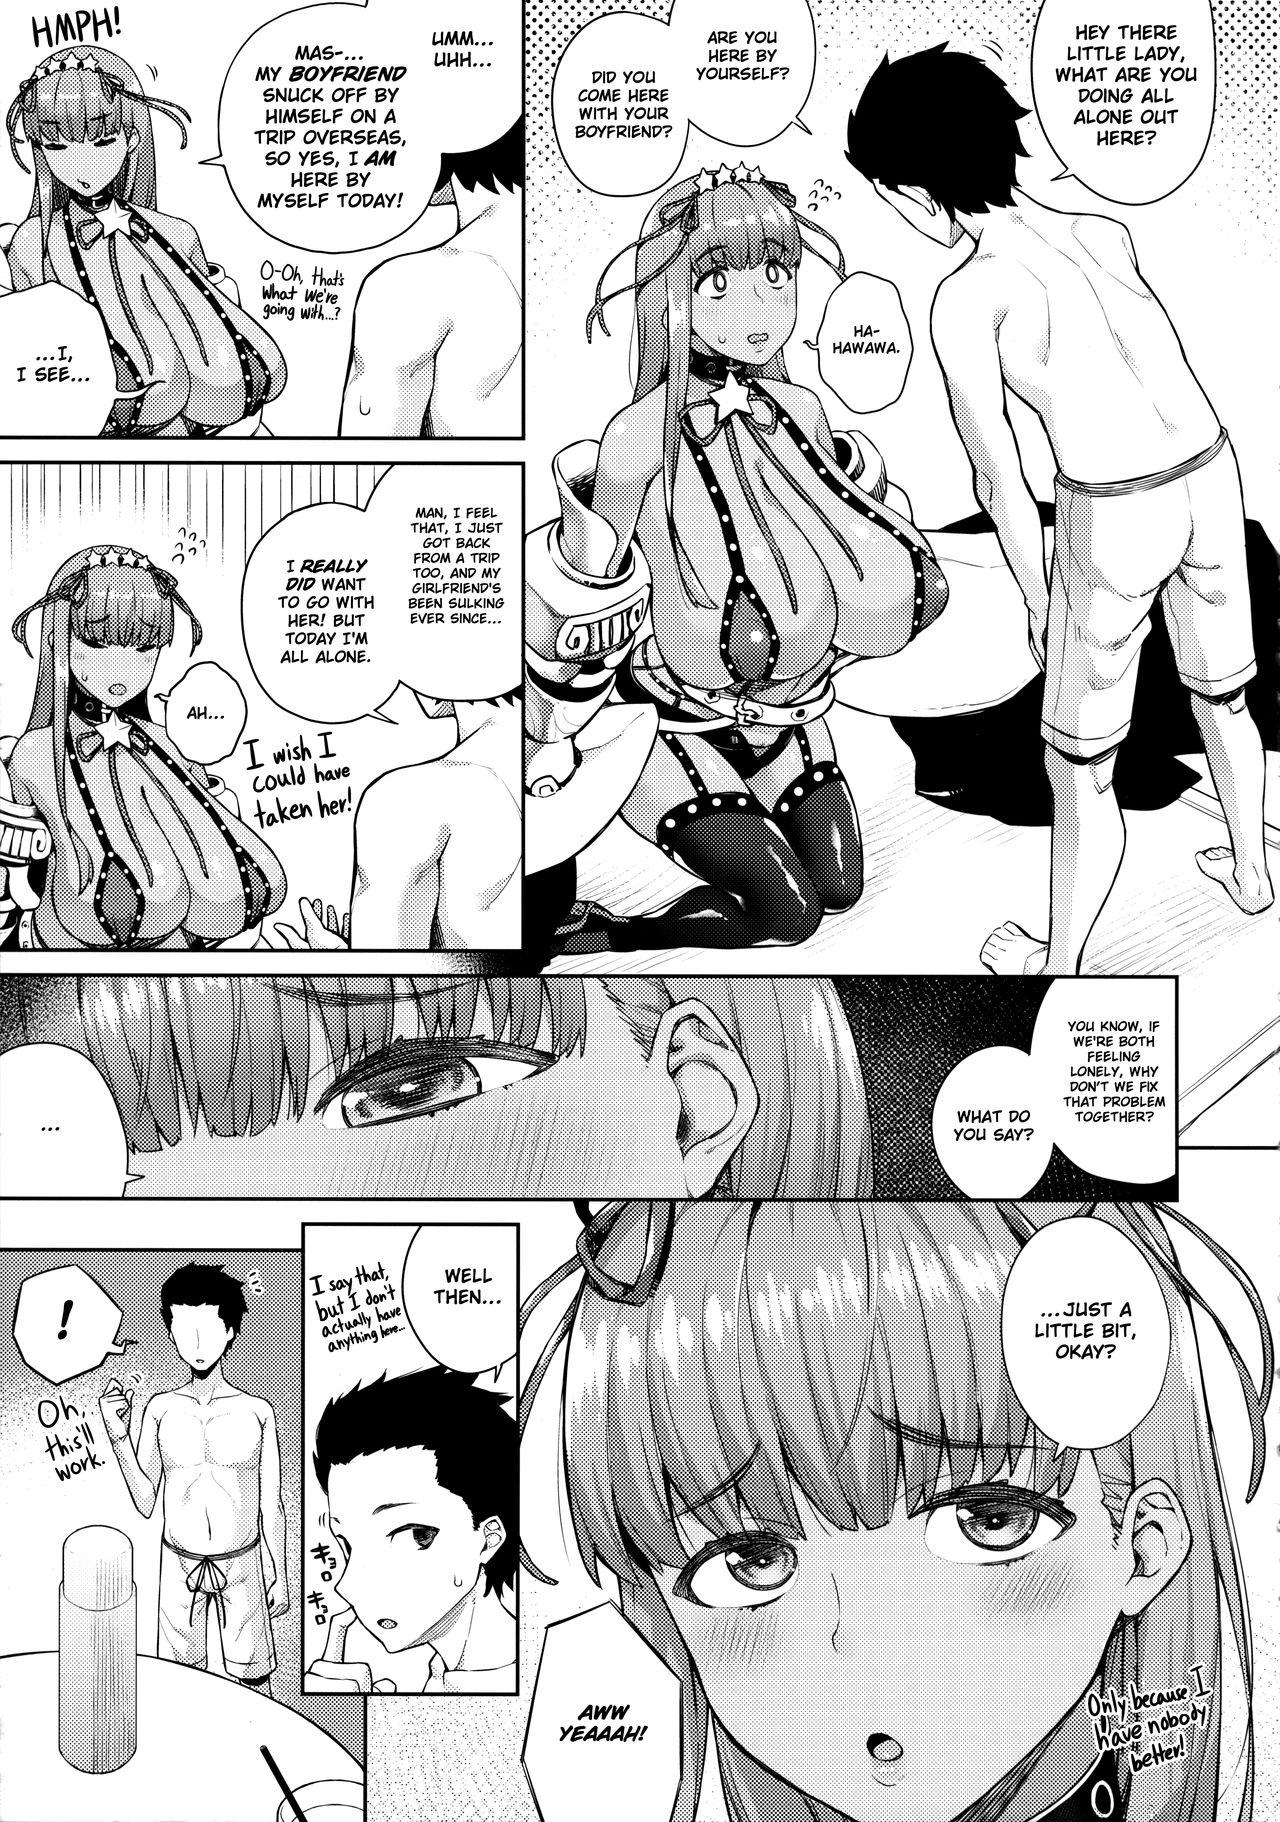 Hot Naked Women Kyokou no Umibe nite | at the fictional seaside - Fate grand order Alt - Page 5